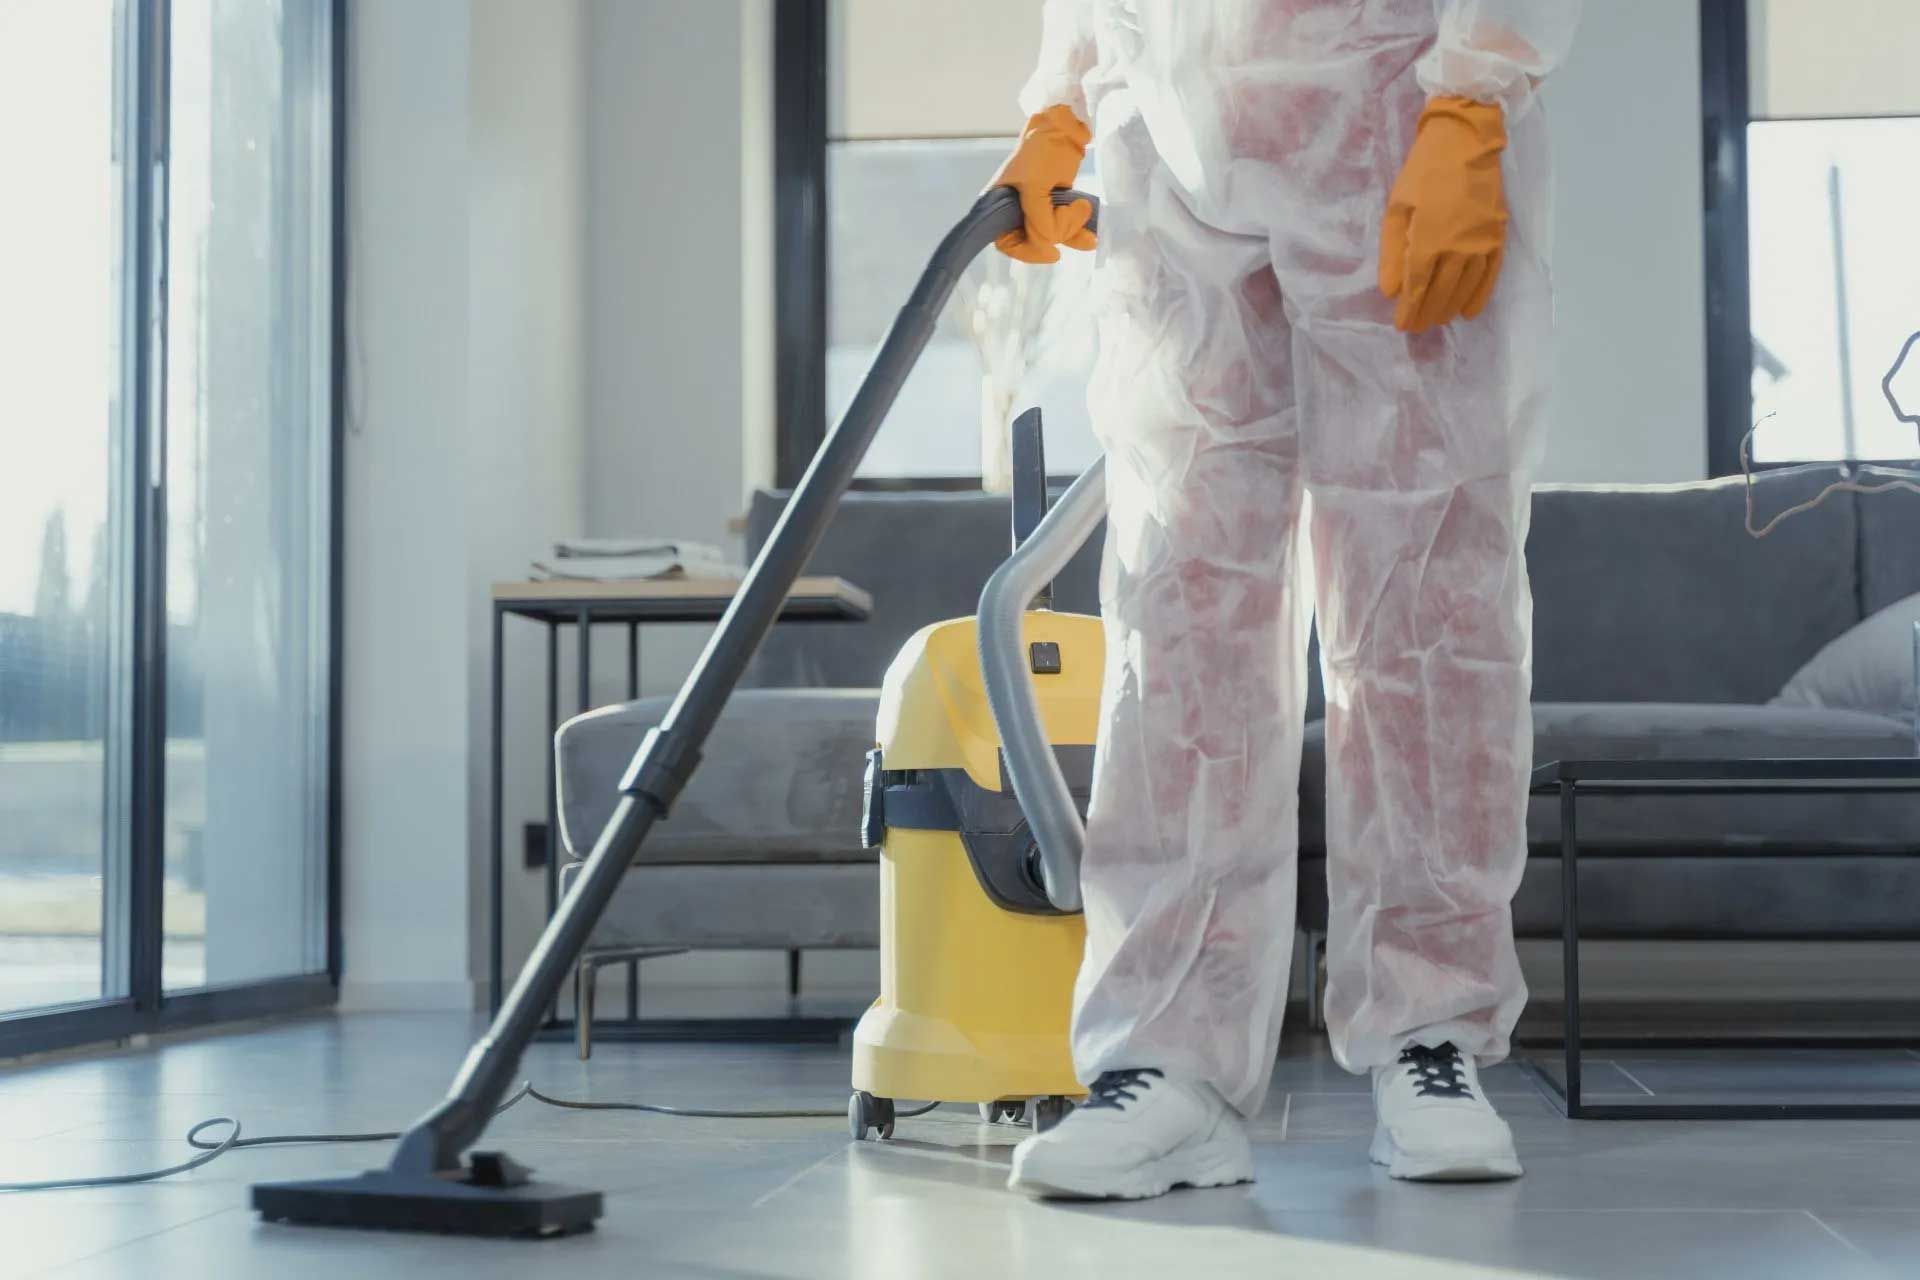 a person in a protective suit is using a vacuum cleaner in a living room .